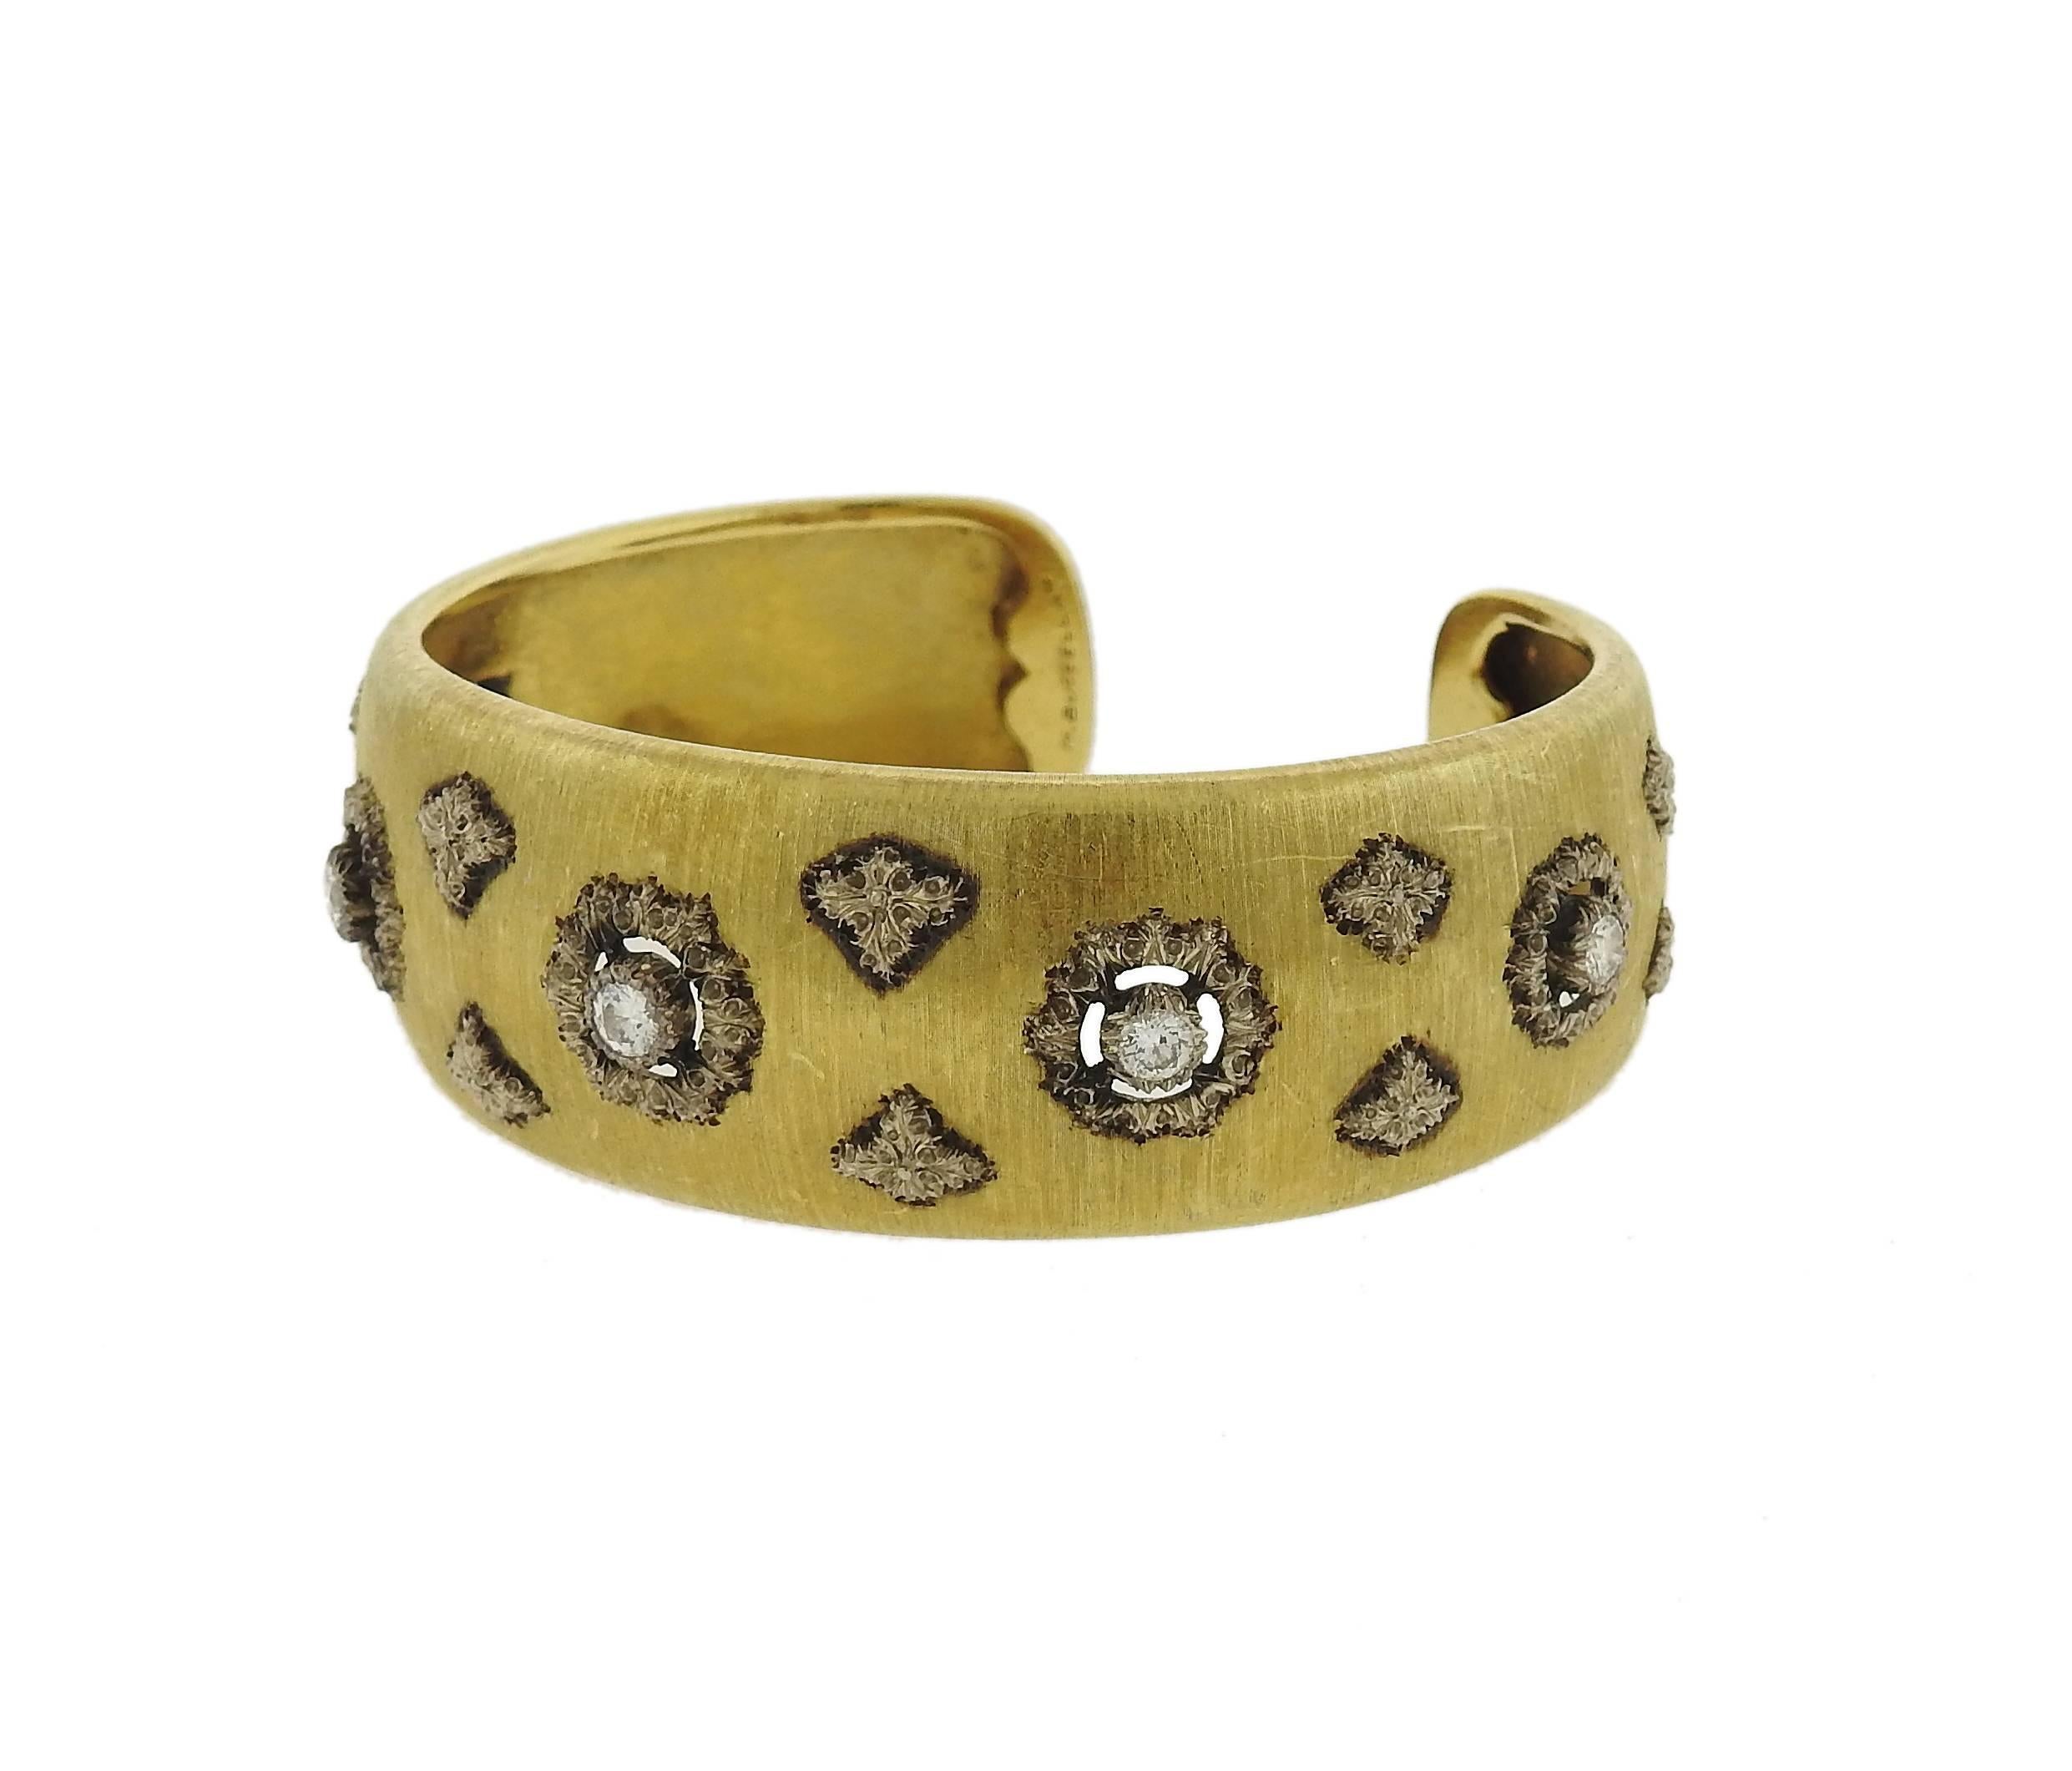 Magnificent 18K gold cuff bracelet decorated with approximately 0.72ctw of diamonds by Mario Buccellati. Cuff measures 22mm wide and will fit up to a 6.5